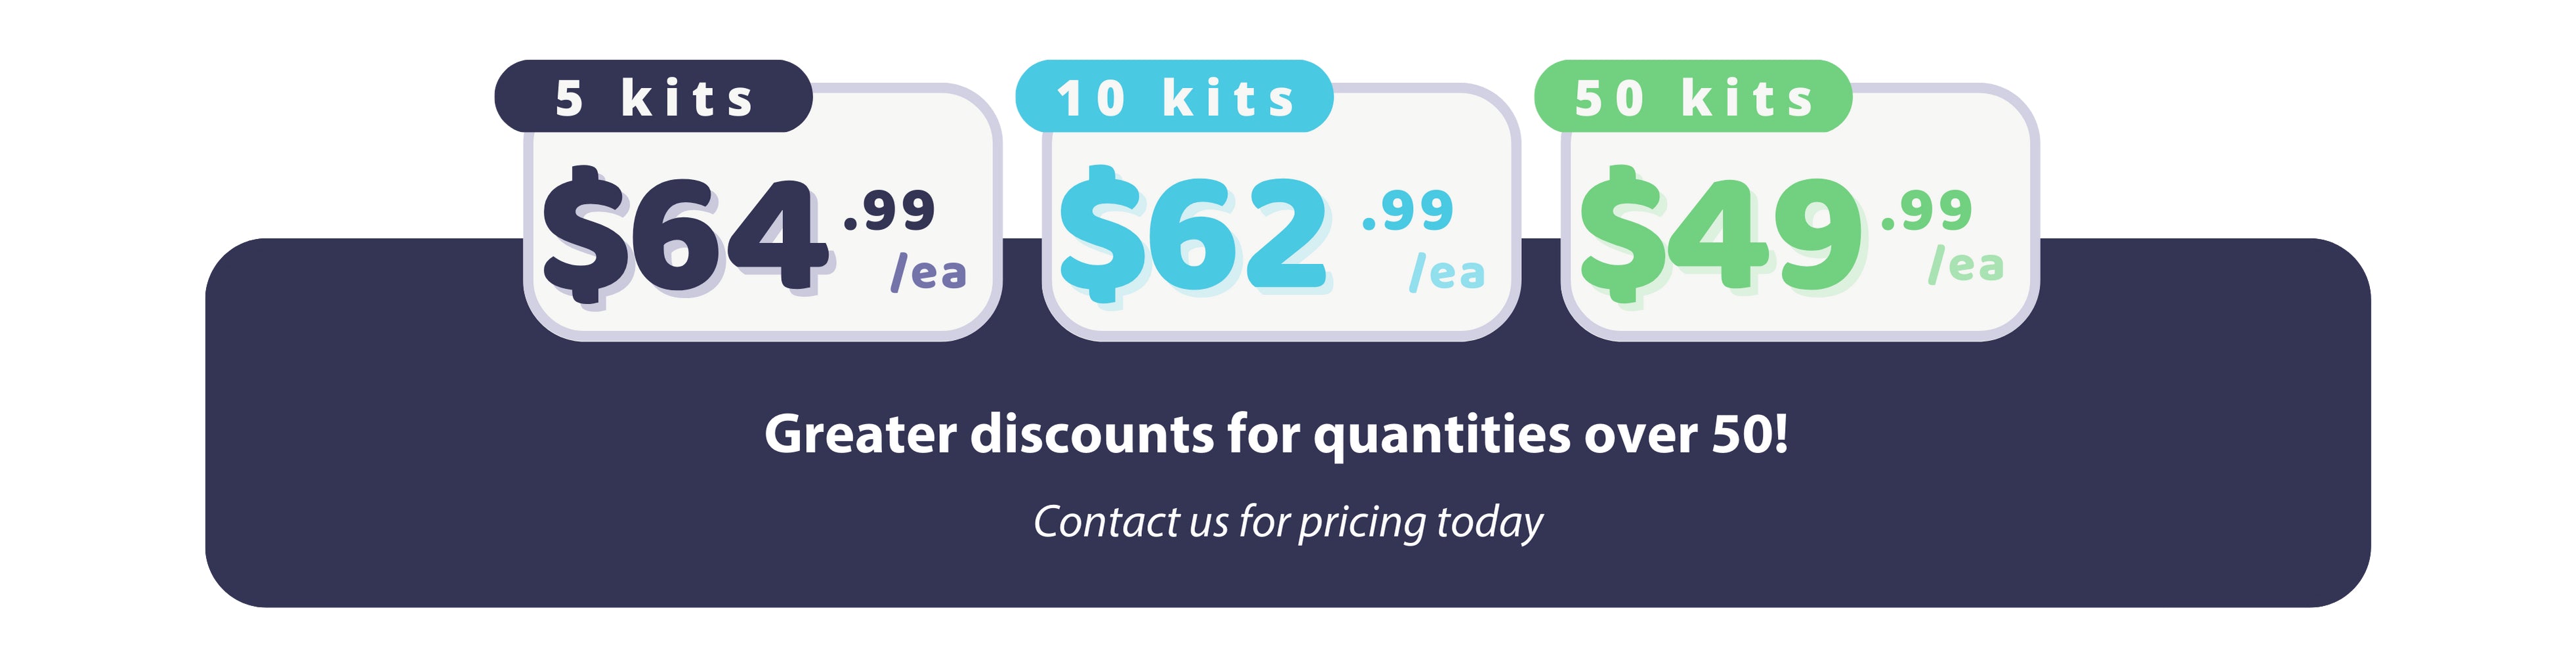 Wholesale bundles of kits start at a $15 discount. Save up to 40% with quantity discounts